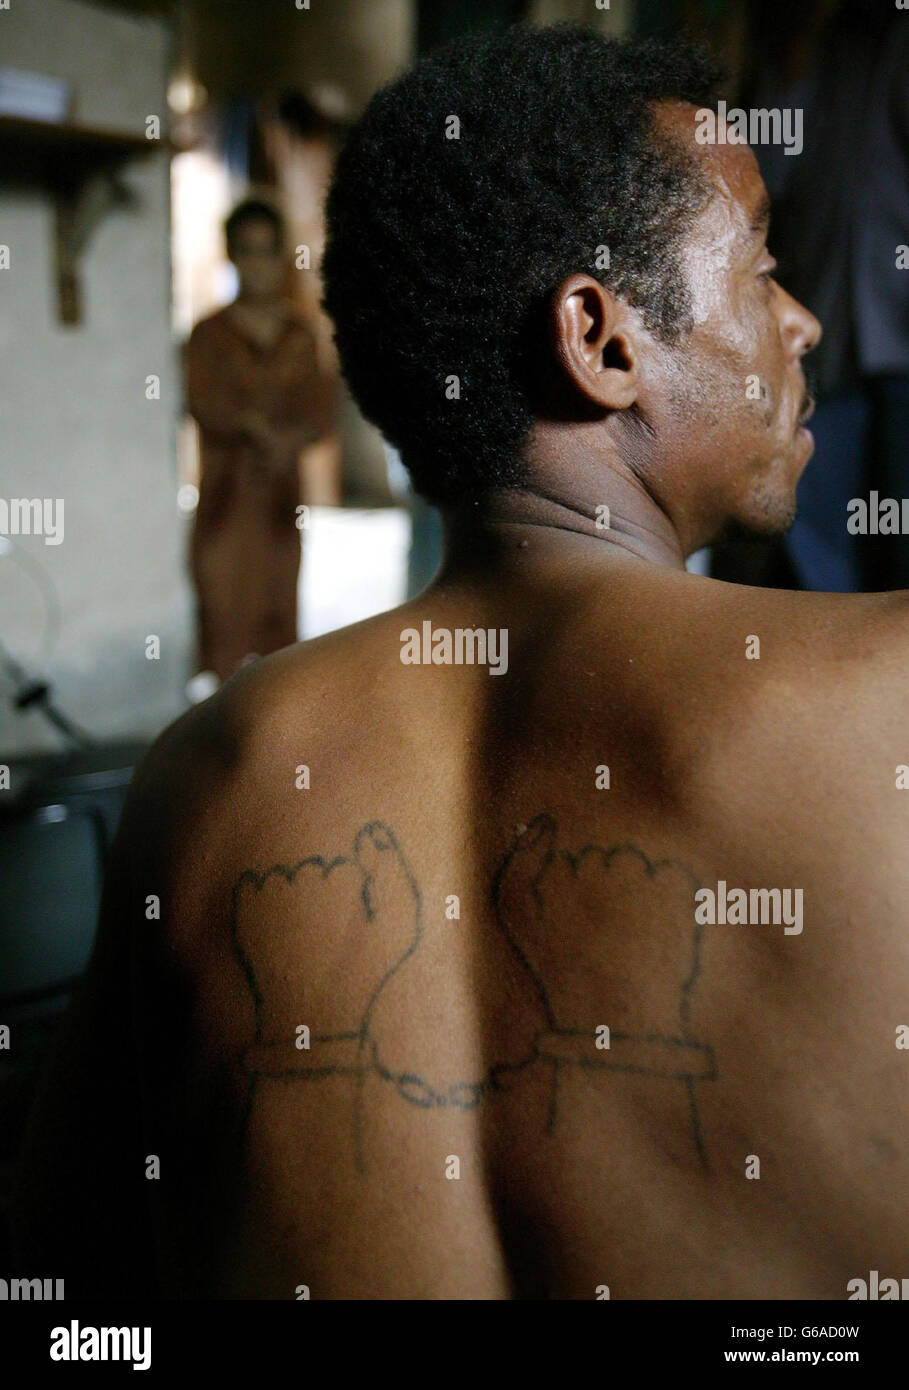 Torture victim Abdul Kareem Kassim in Shuhaba, southern Iraq, shows off the tattoo forcibly cut into his back by Saddam Hussein regime's prison guards. Dan Chung/Guardian/MOD Pool. Stock Photo